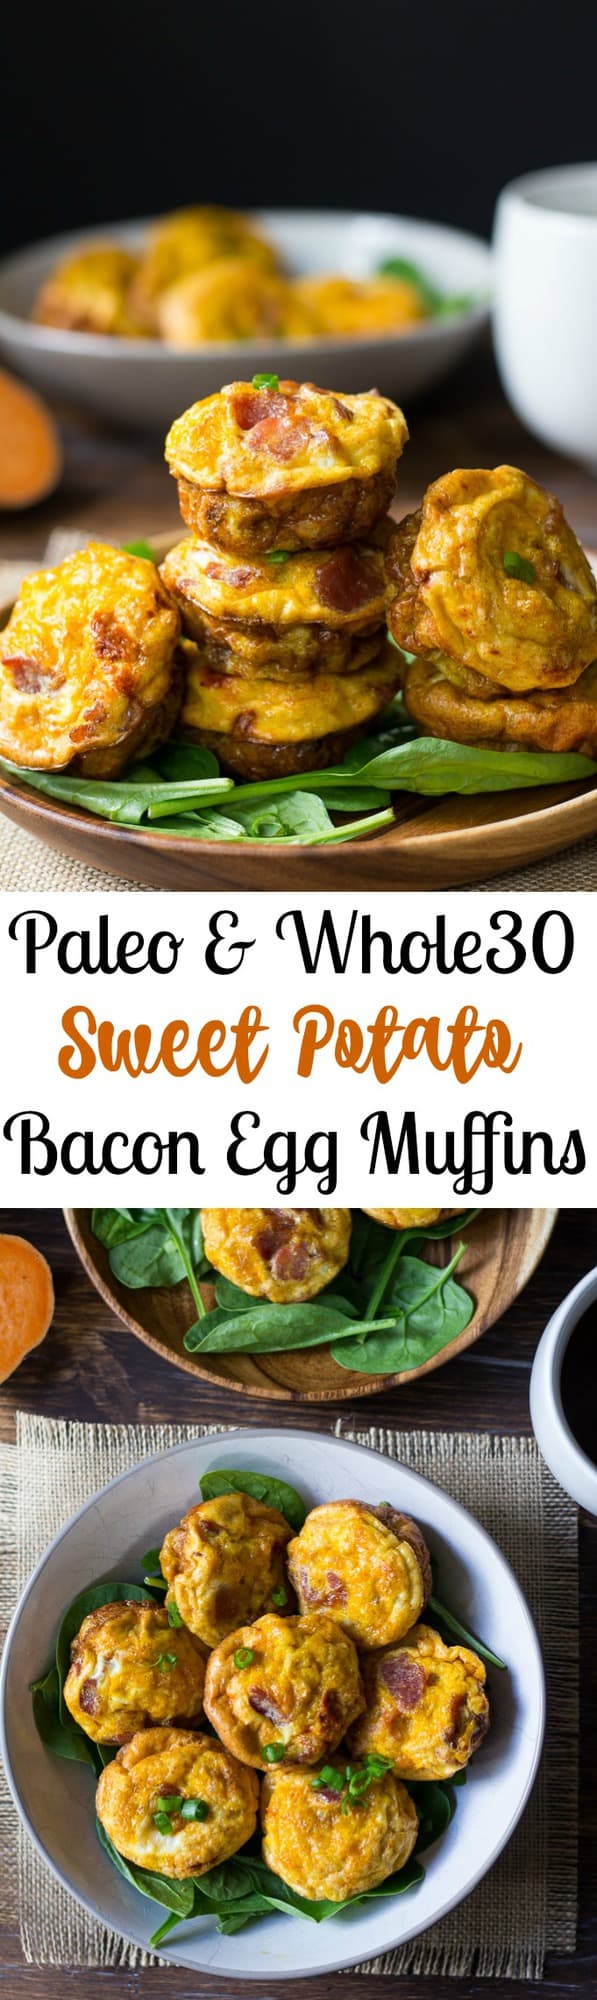 paleo and Whole30 friendly Sweet Potato Bacon Egg Muffins that you can make ahead of time for an easy Paleo breakfast to grab and go!